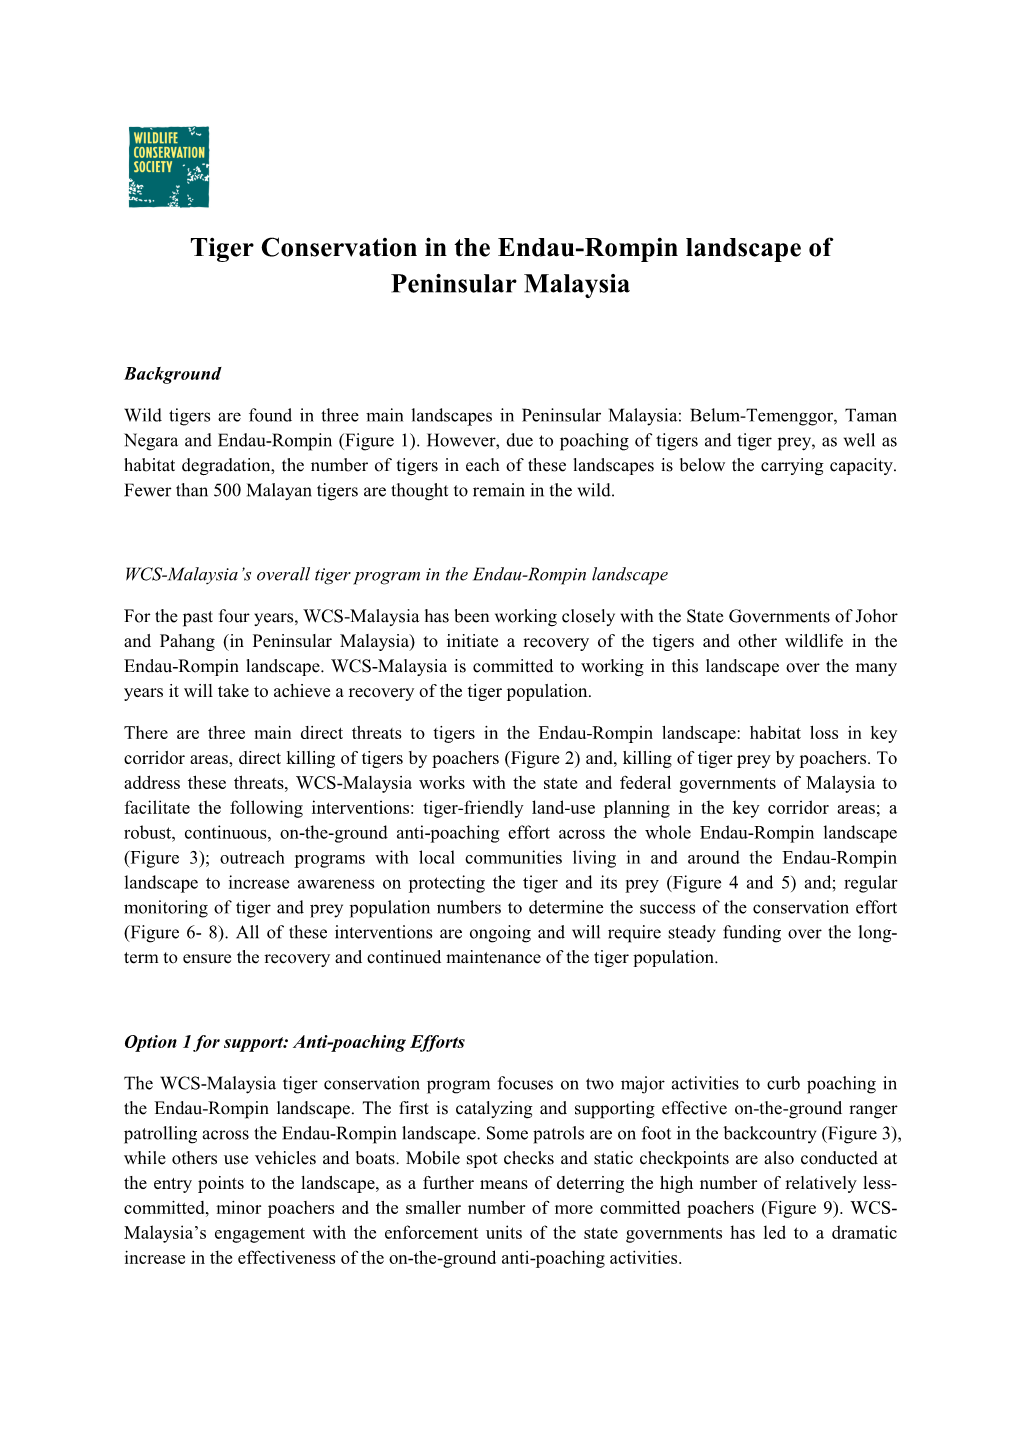 Tiger Conservation in the Endau-Rompin Landscape of Peninsular Malaysia